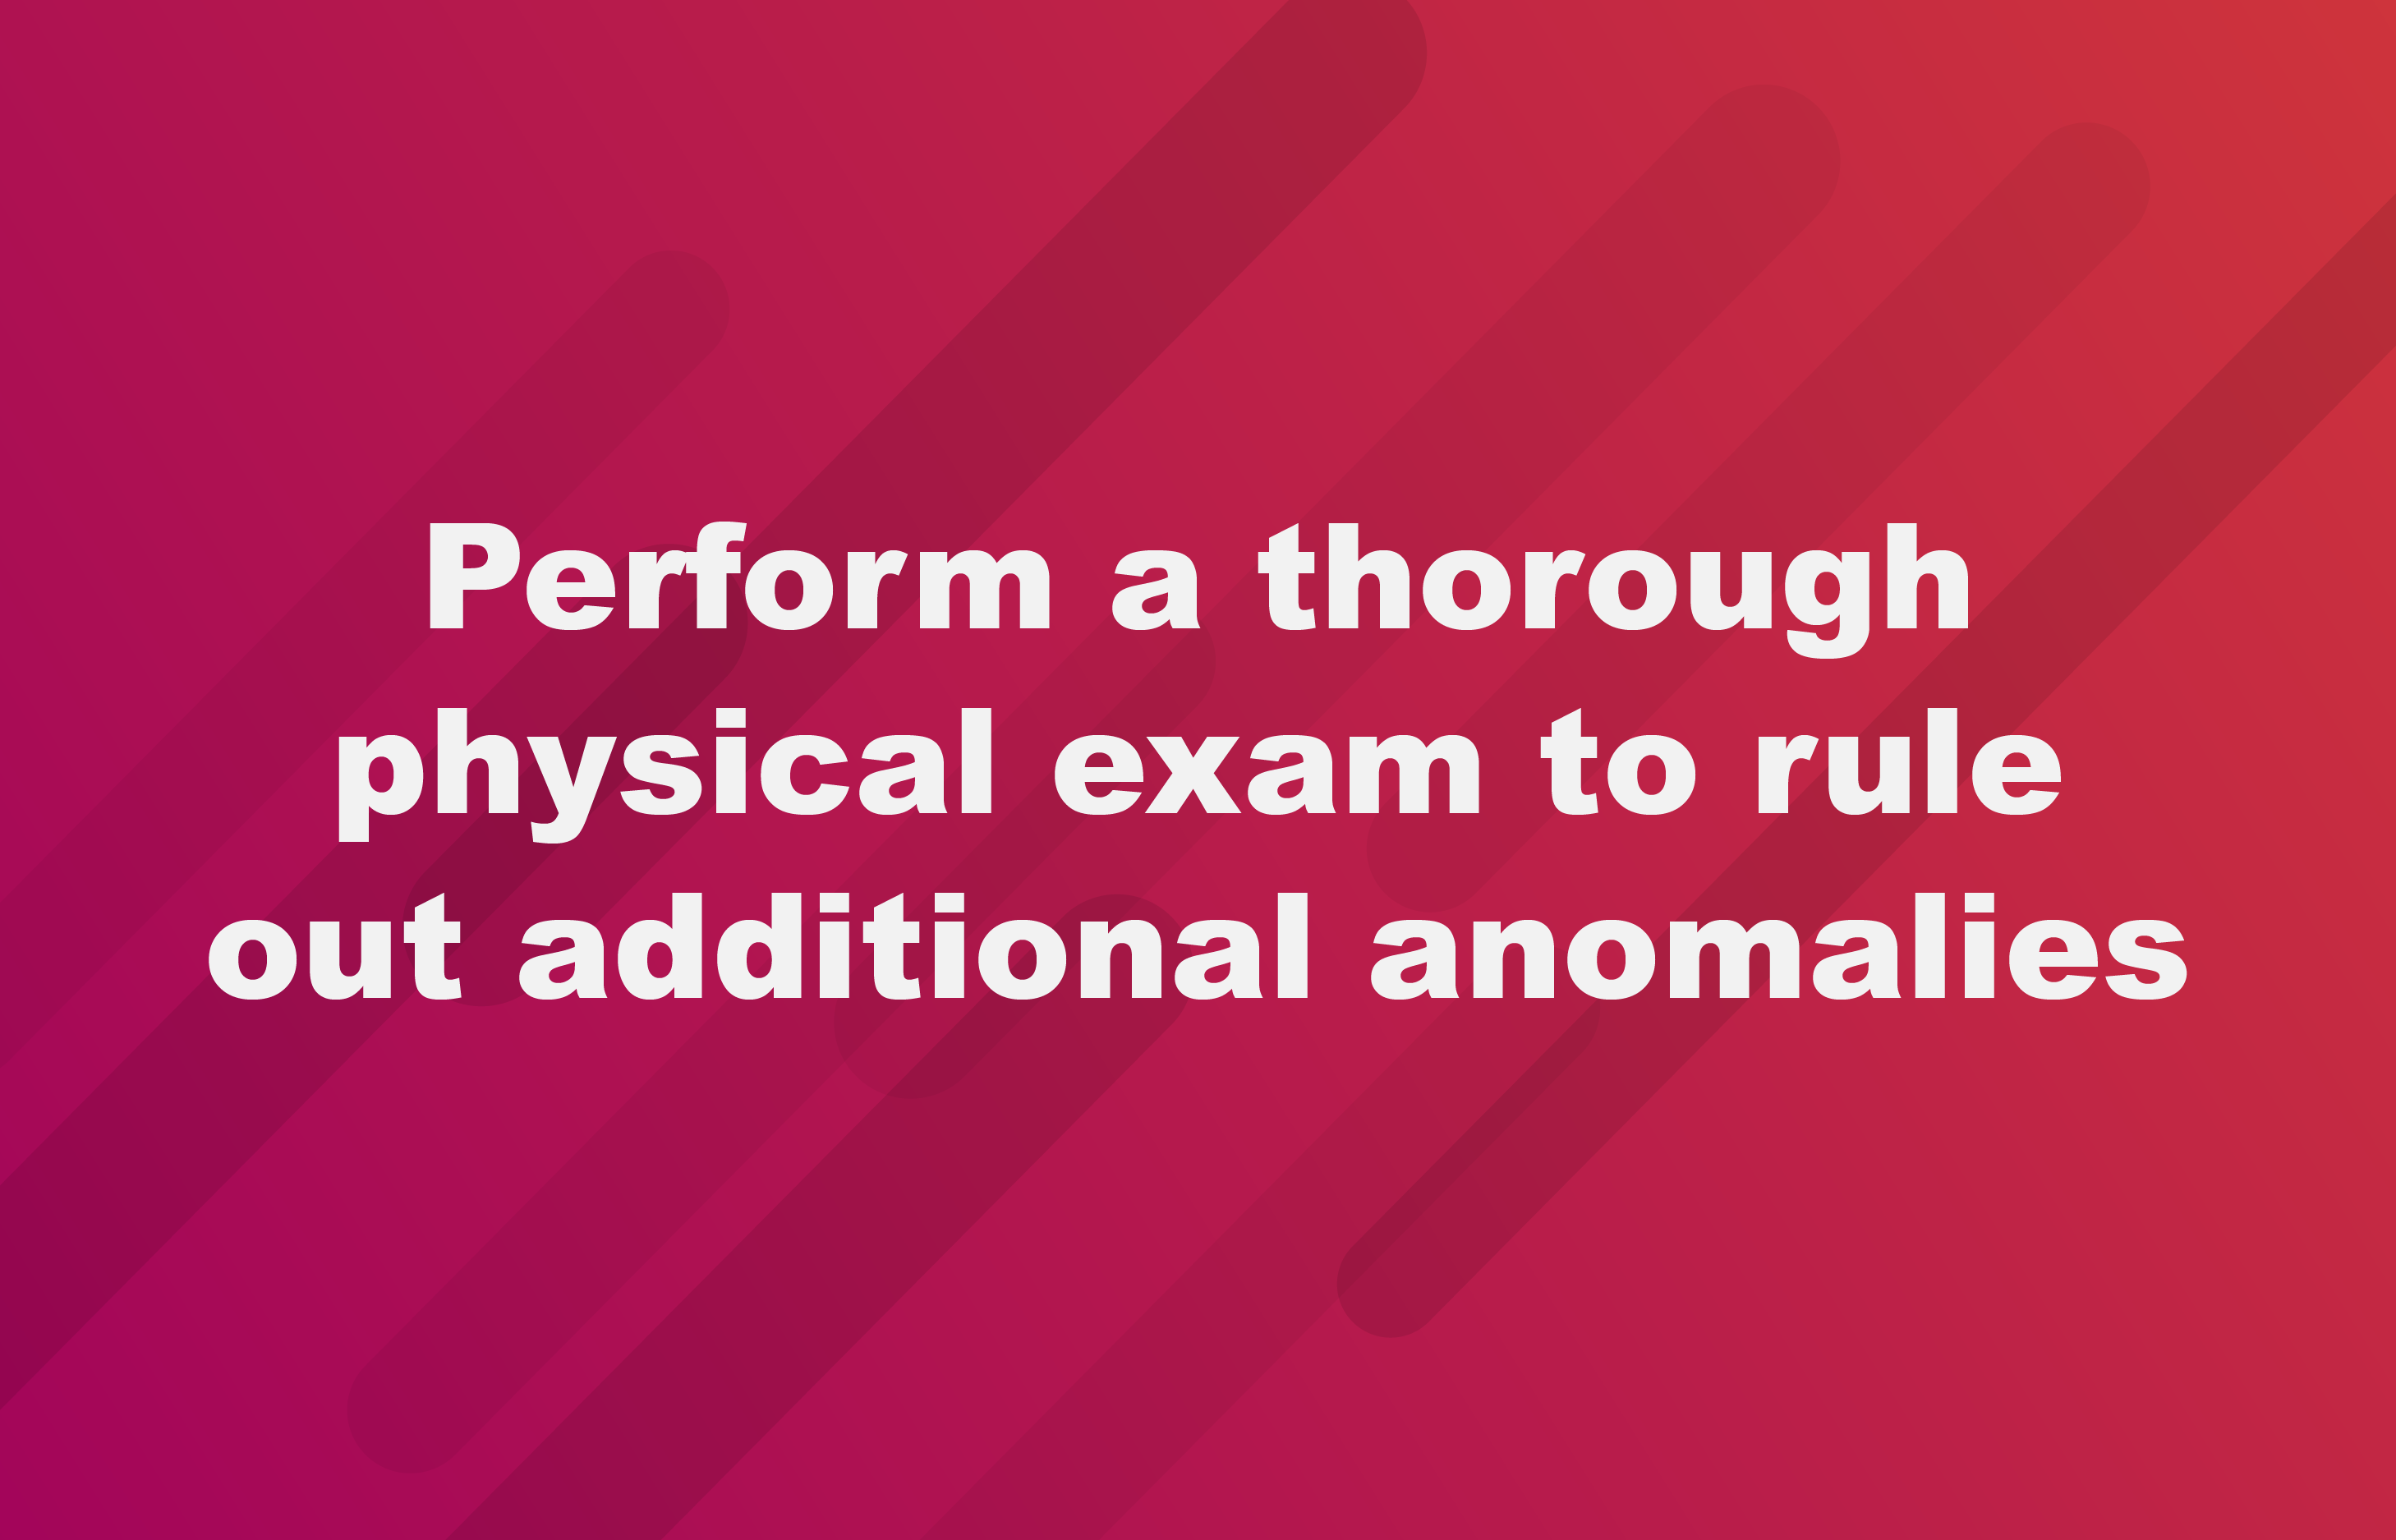 Perform a thorough physical exam to rule out additional anomalies